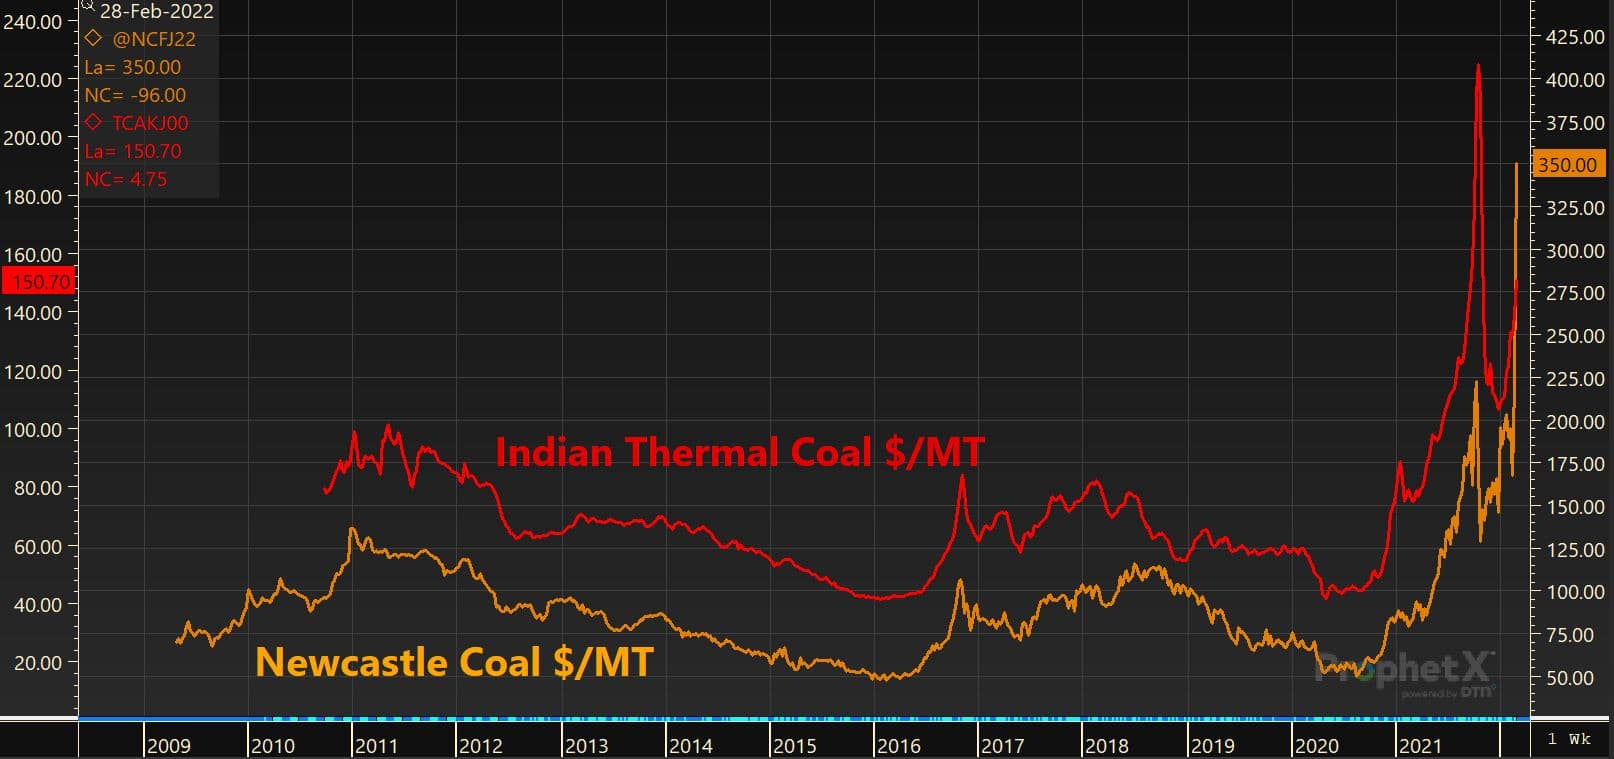 Indian thermal coal $/mt and Newcastle coal $/mt